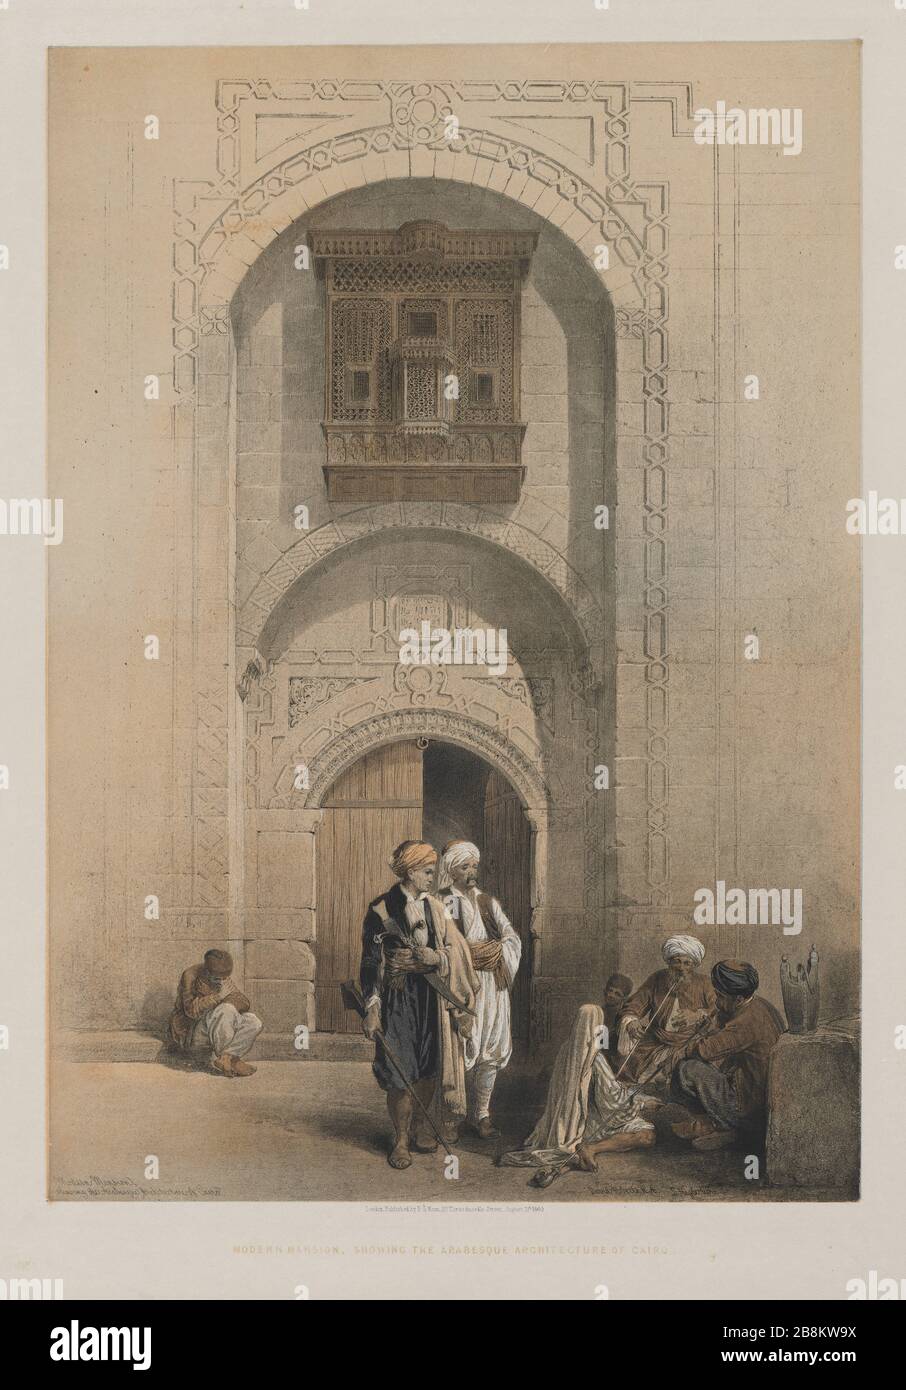 Egypt and Nubia, Volume III: Modern Mansion, showing the Arabesque Architecture of Cairo, 1849. Louis Haghe (British, 1806-1885), F.G.Moon, 20 Threadneedle Street, London, after David Roberts (British, 1796-1864). Color lithograph; sheet: 60.3 x 43.8 cm (23 3/4 x 17 1/4 in.); image: 49.9 x 35.1 cm (19 5/8 x 13 13/16 in.). The Cleveland Museum of Art, Bequest of John Bonebrake 2012.171 Stock Photo